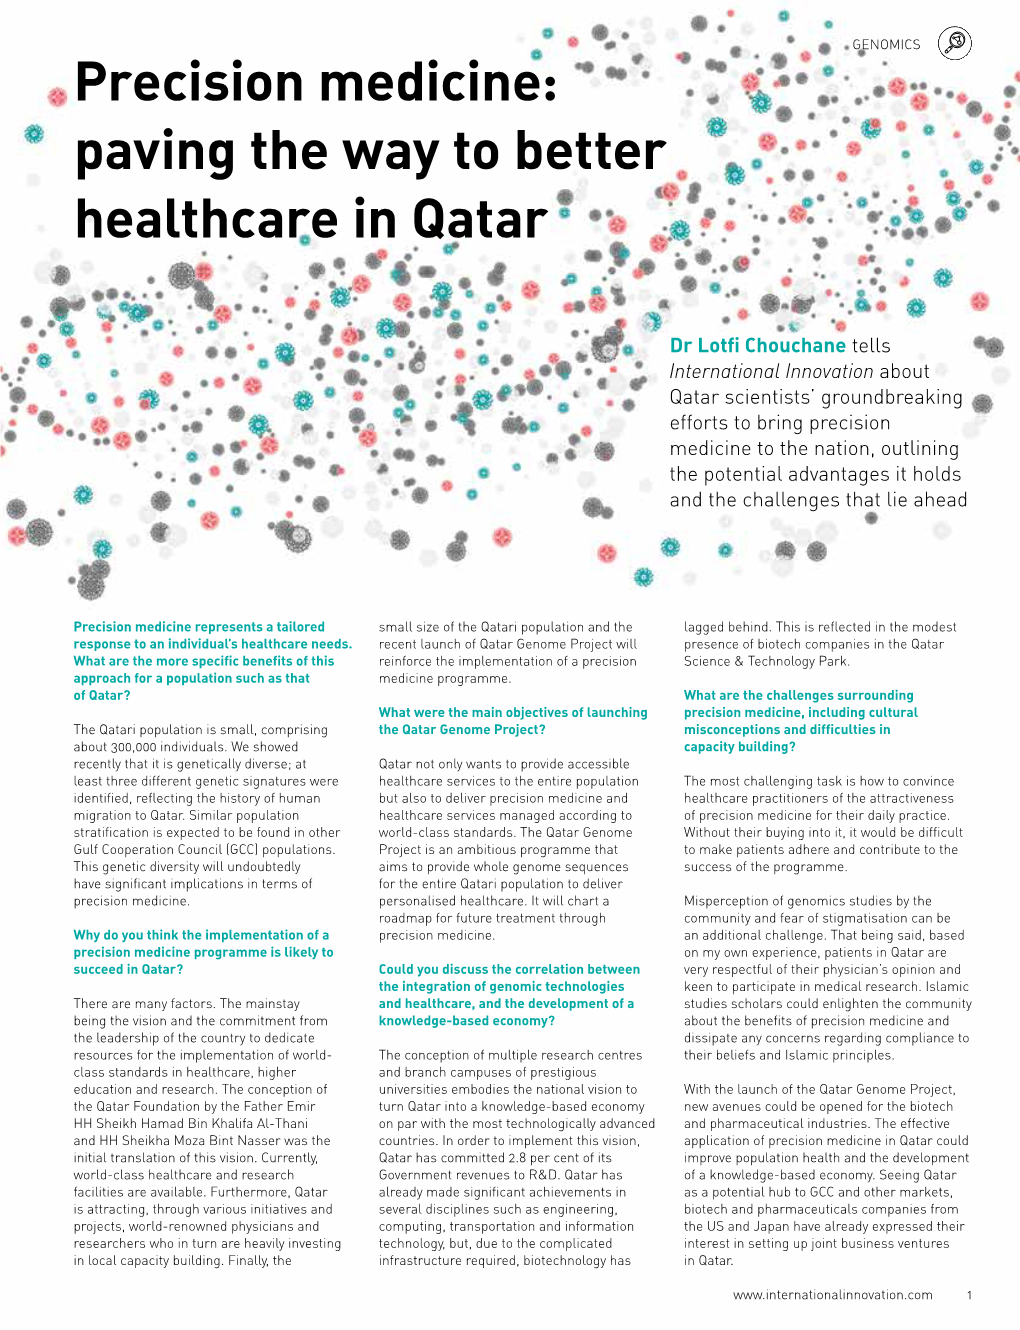 Precision Medicine in Qatar Could Initial Translation of This Vision